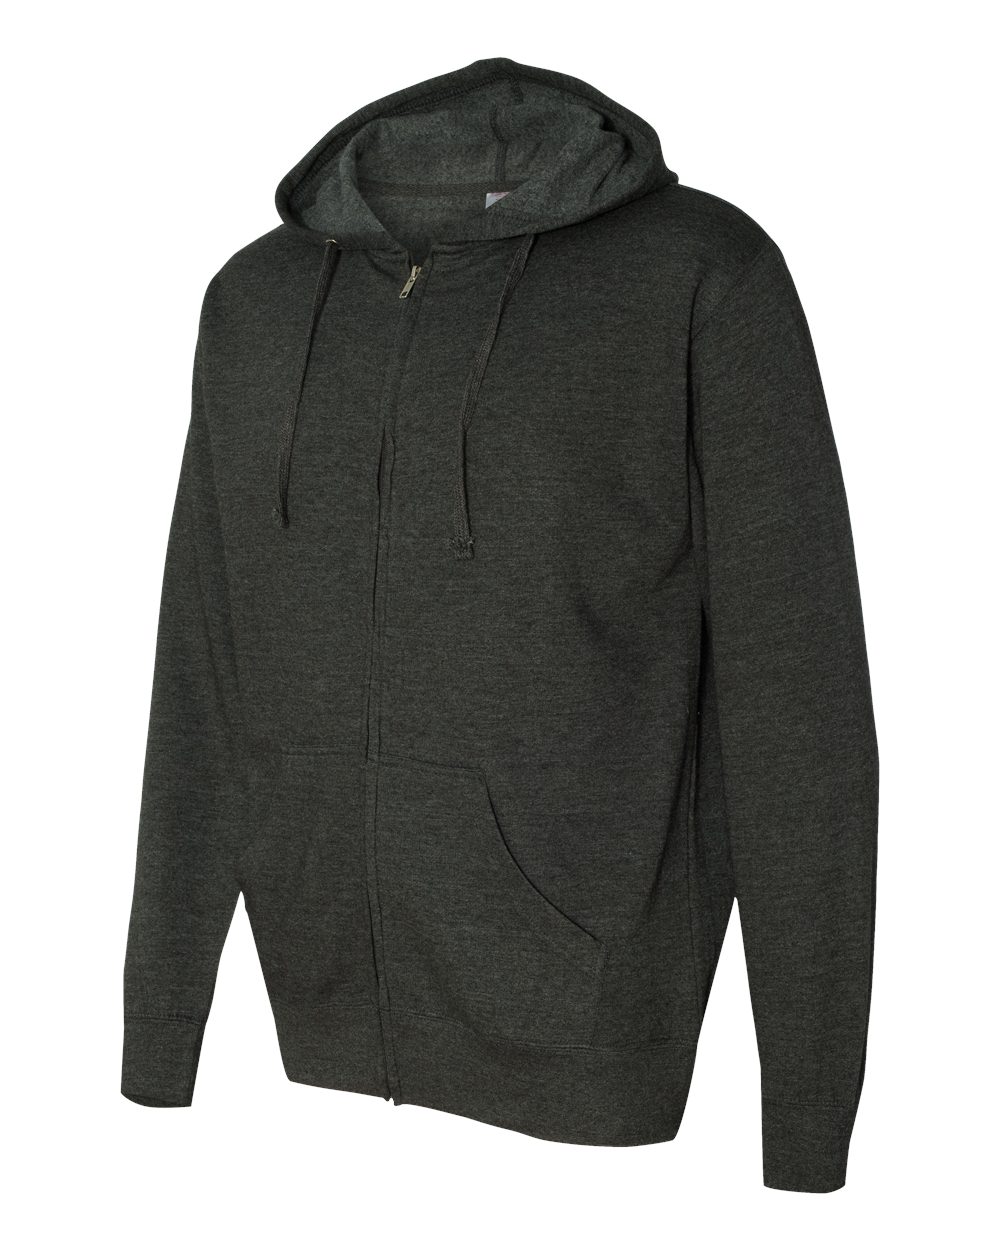 Independent Trading Co. Heavenly Fleece Full-Zip Hooded Pullover - SS2200Z